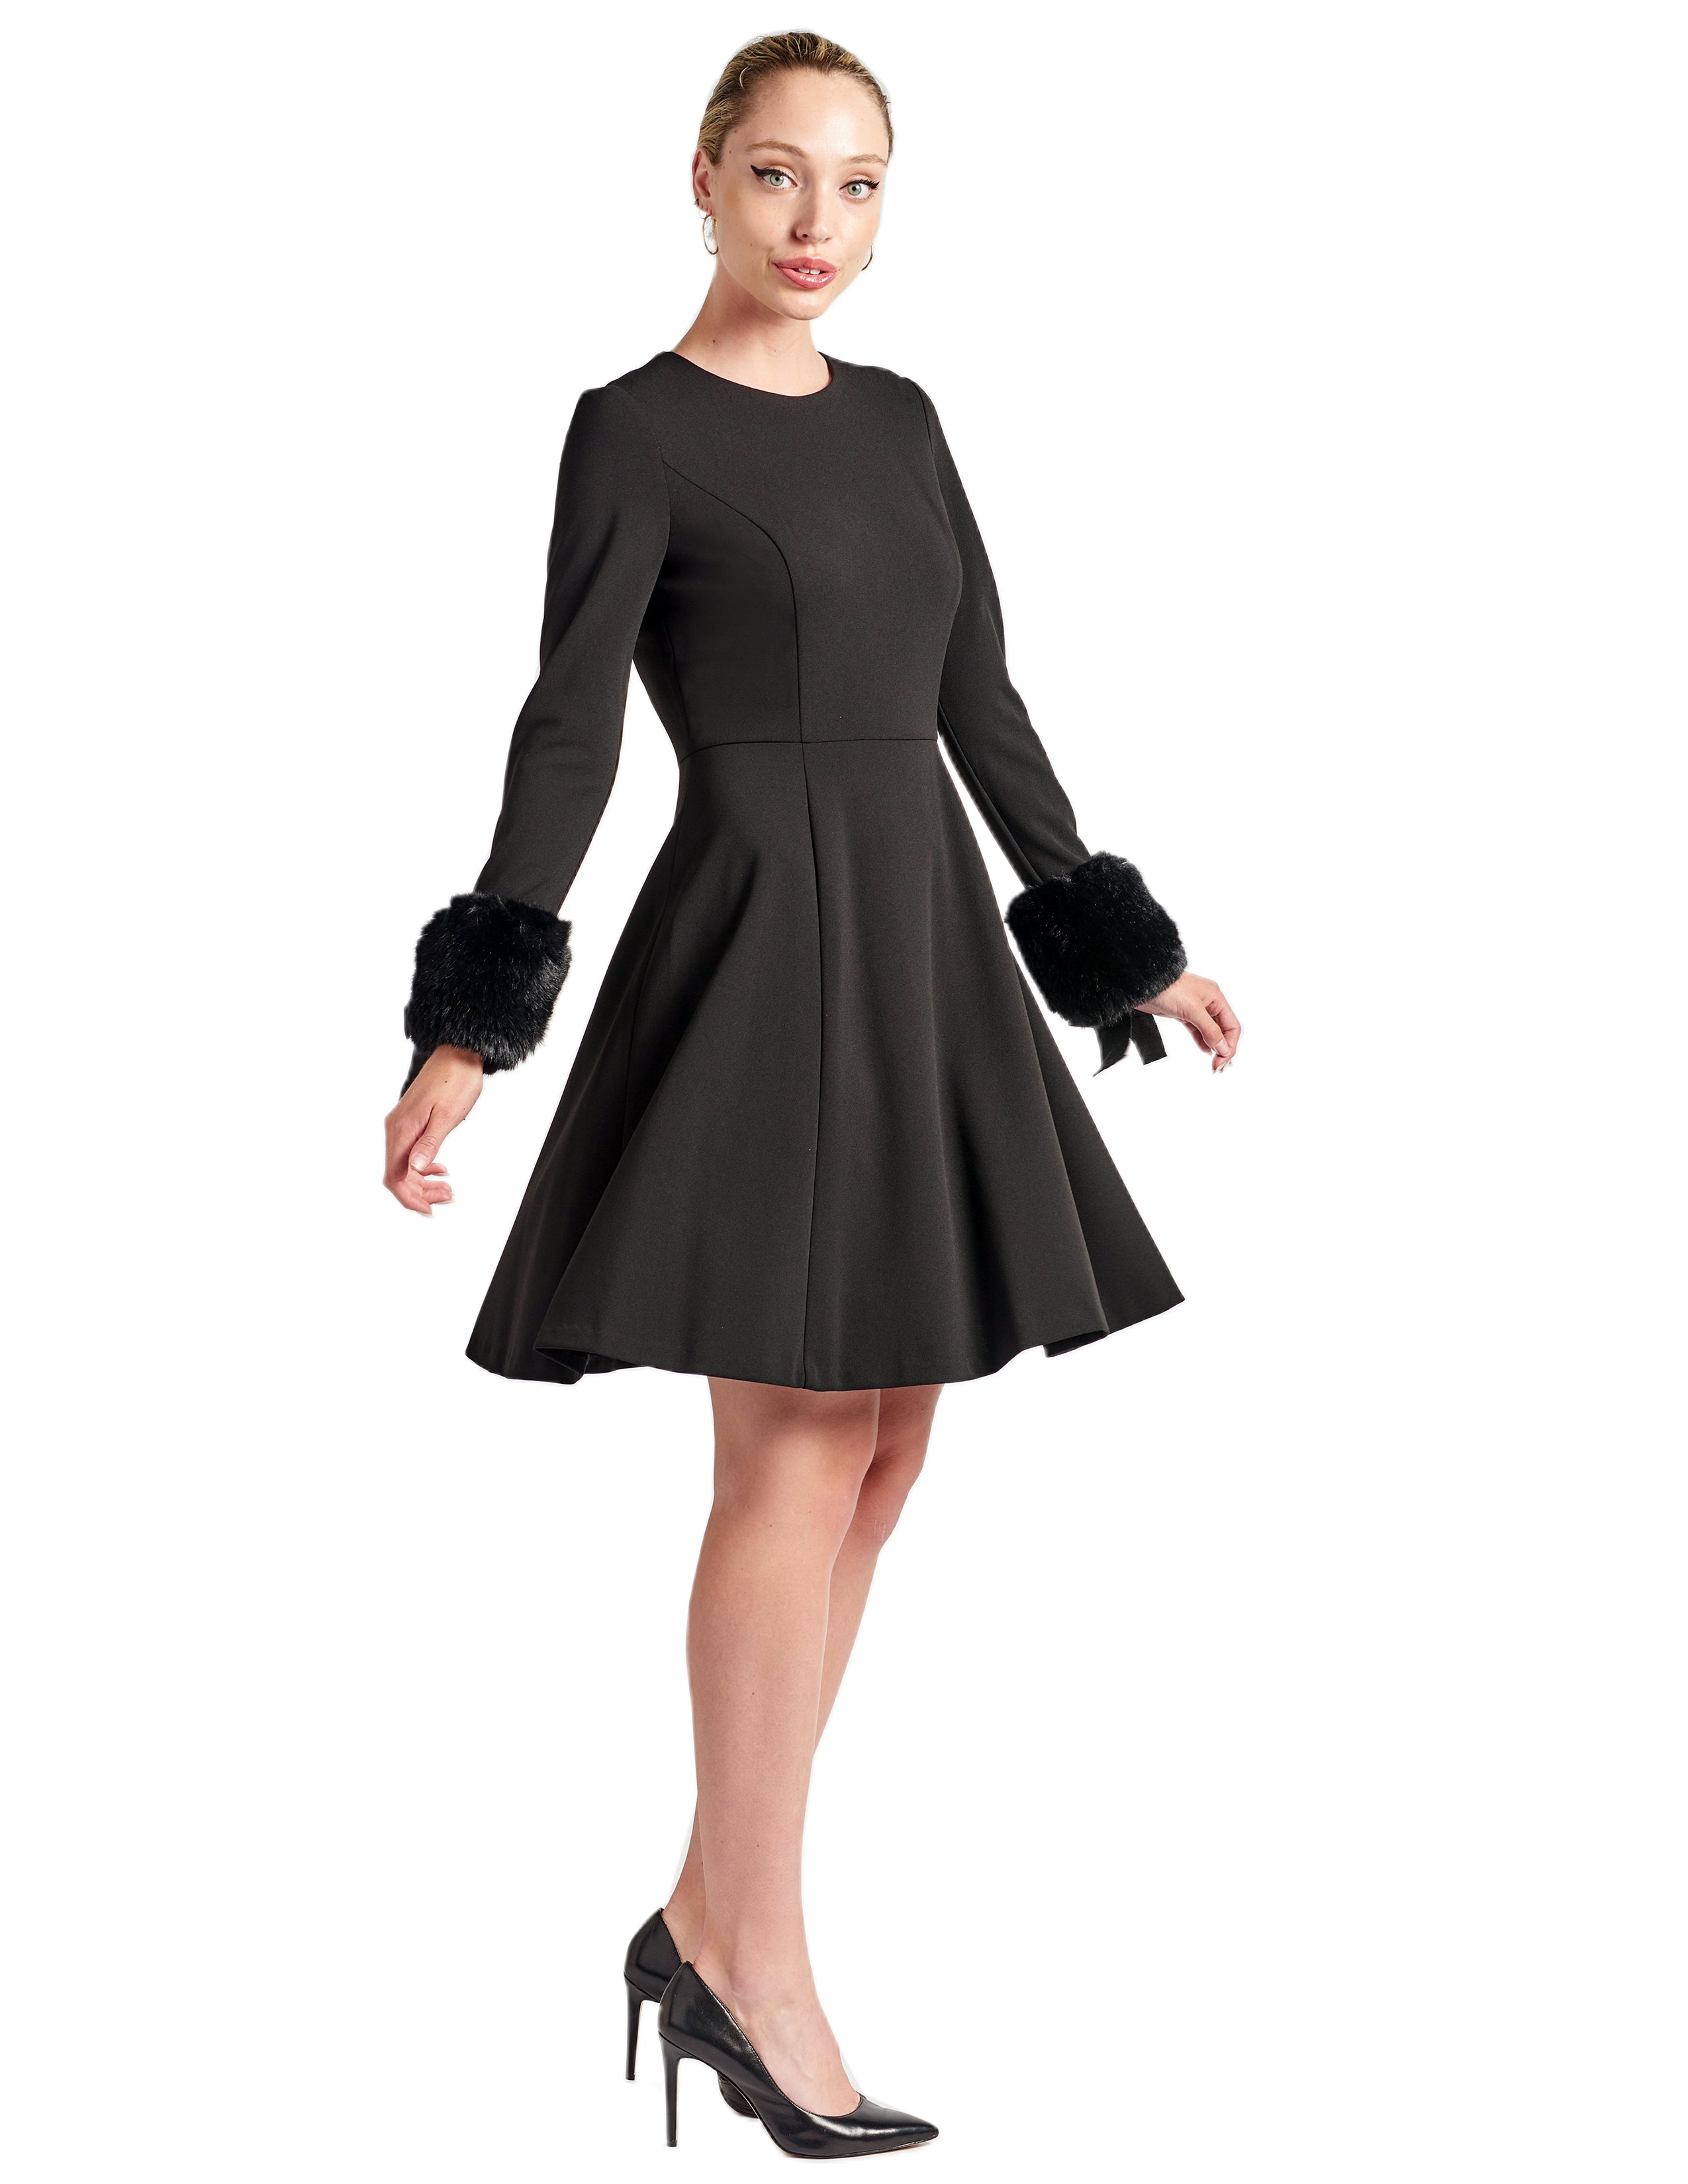 Model twirling in fit & flare black poly crepe long sleeve dress with sweetheart neckline & faux fur cuffs